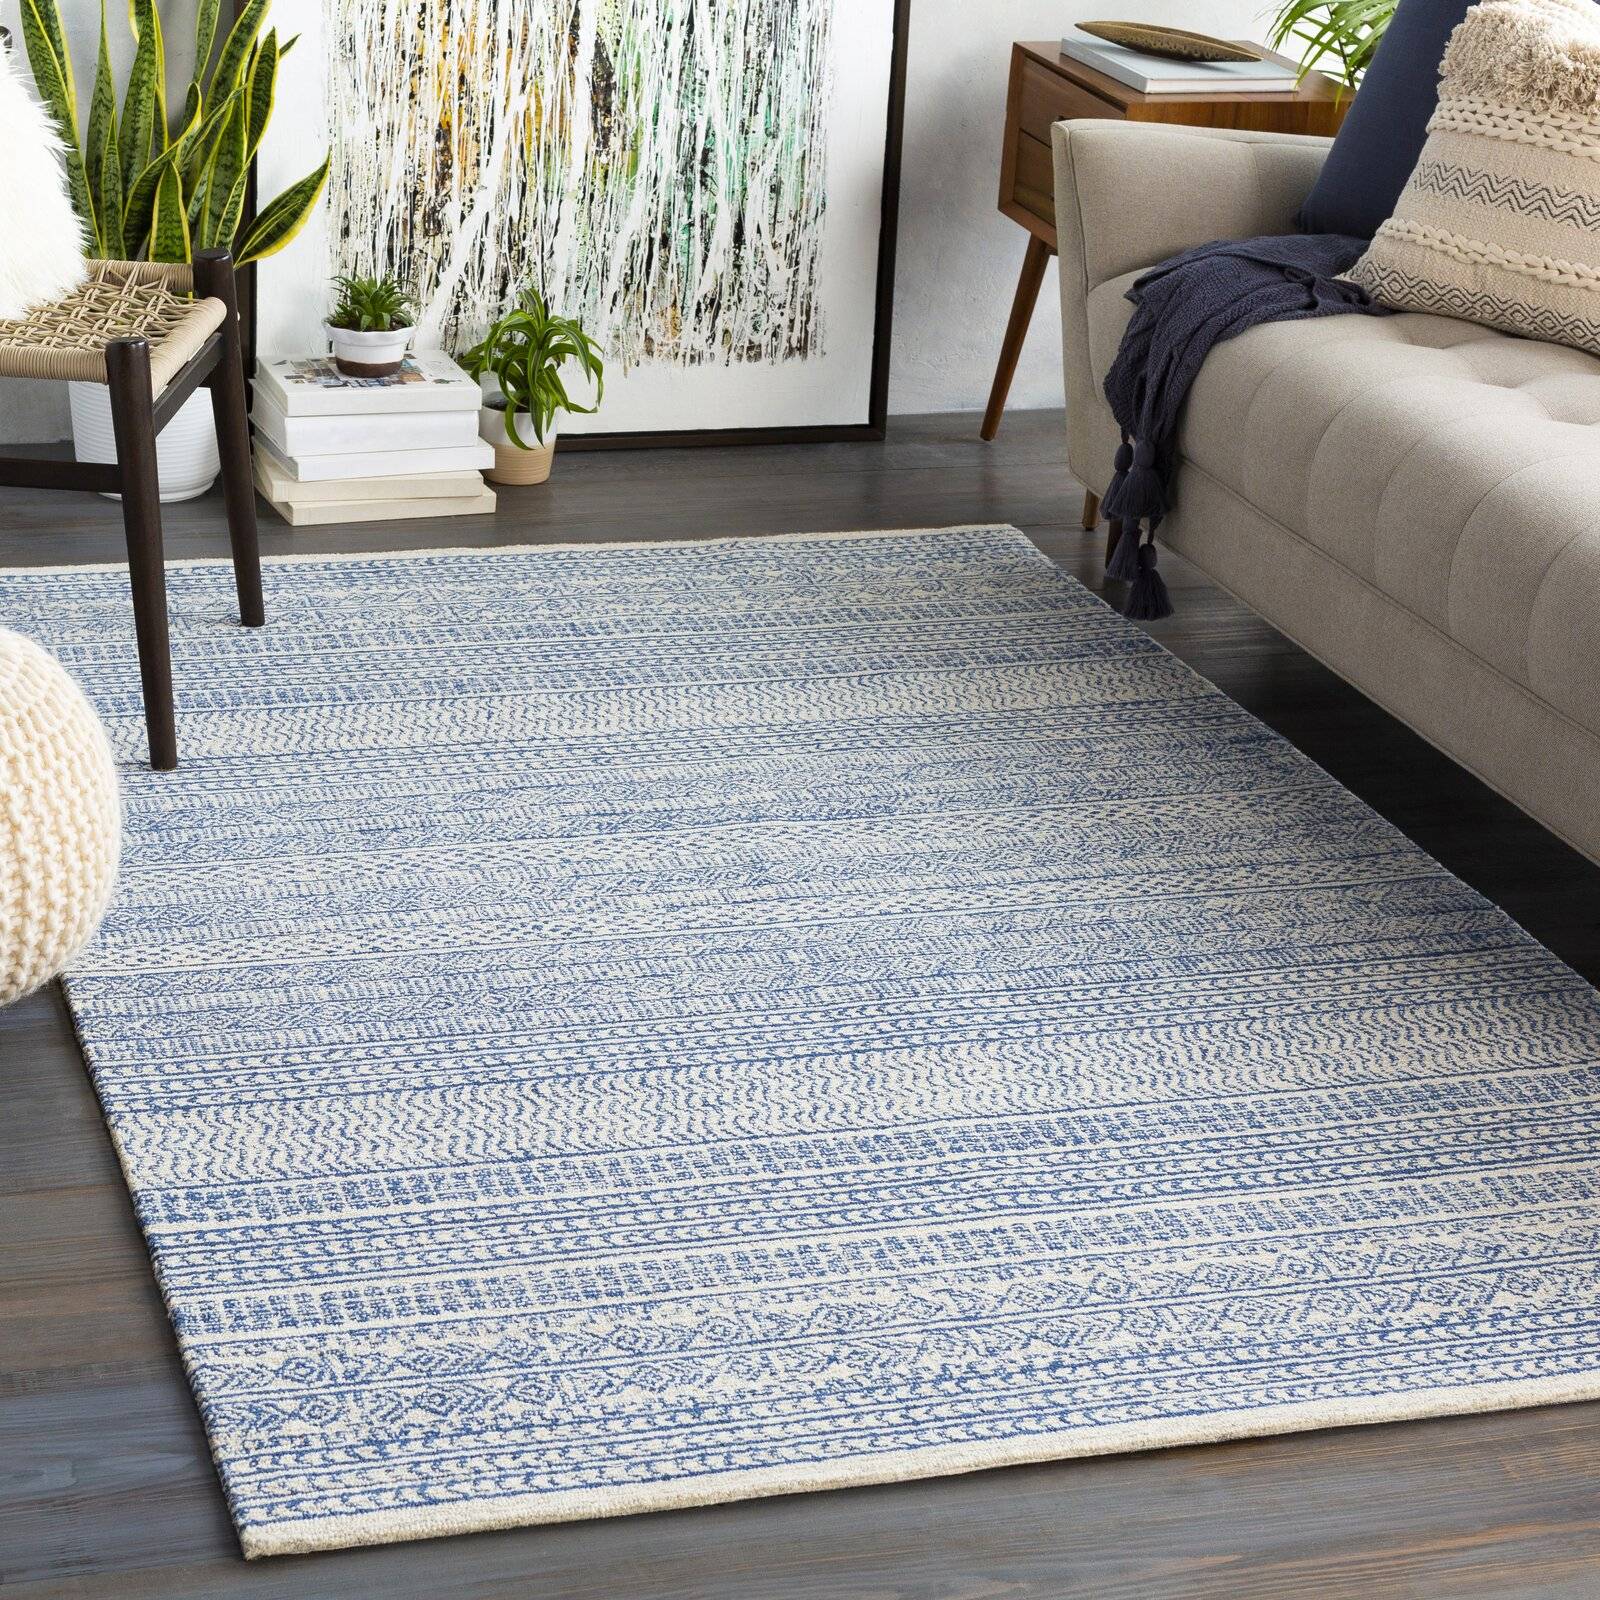 Wool area rug to add warmth to the space (from Wayfair)